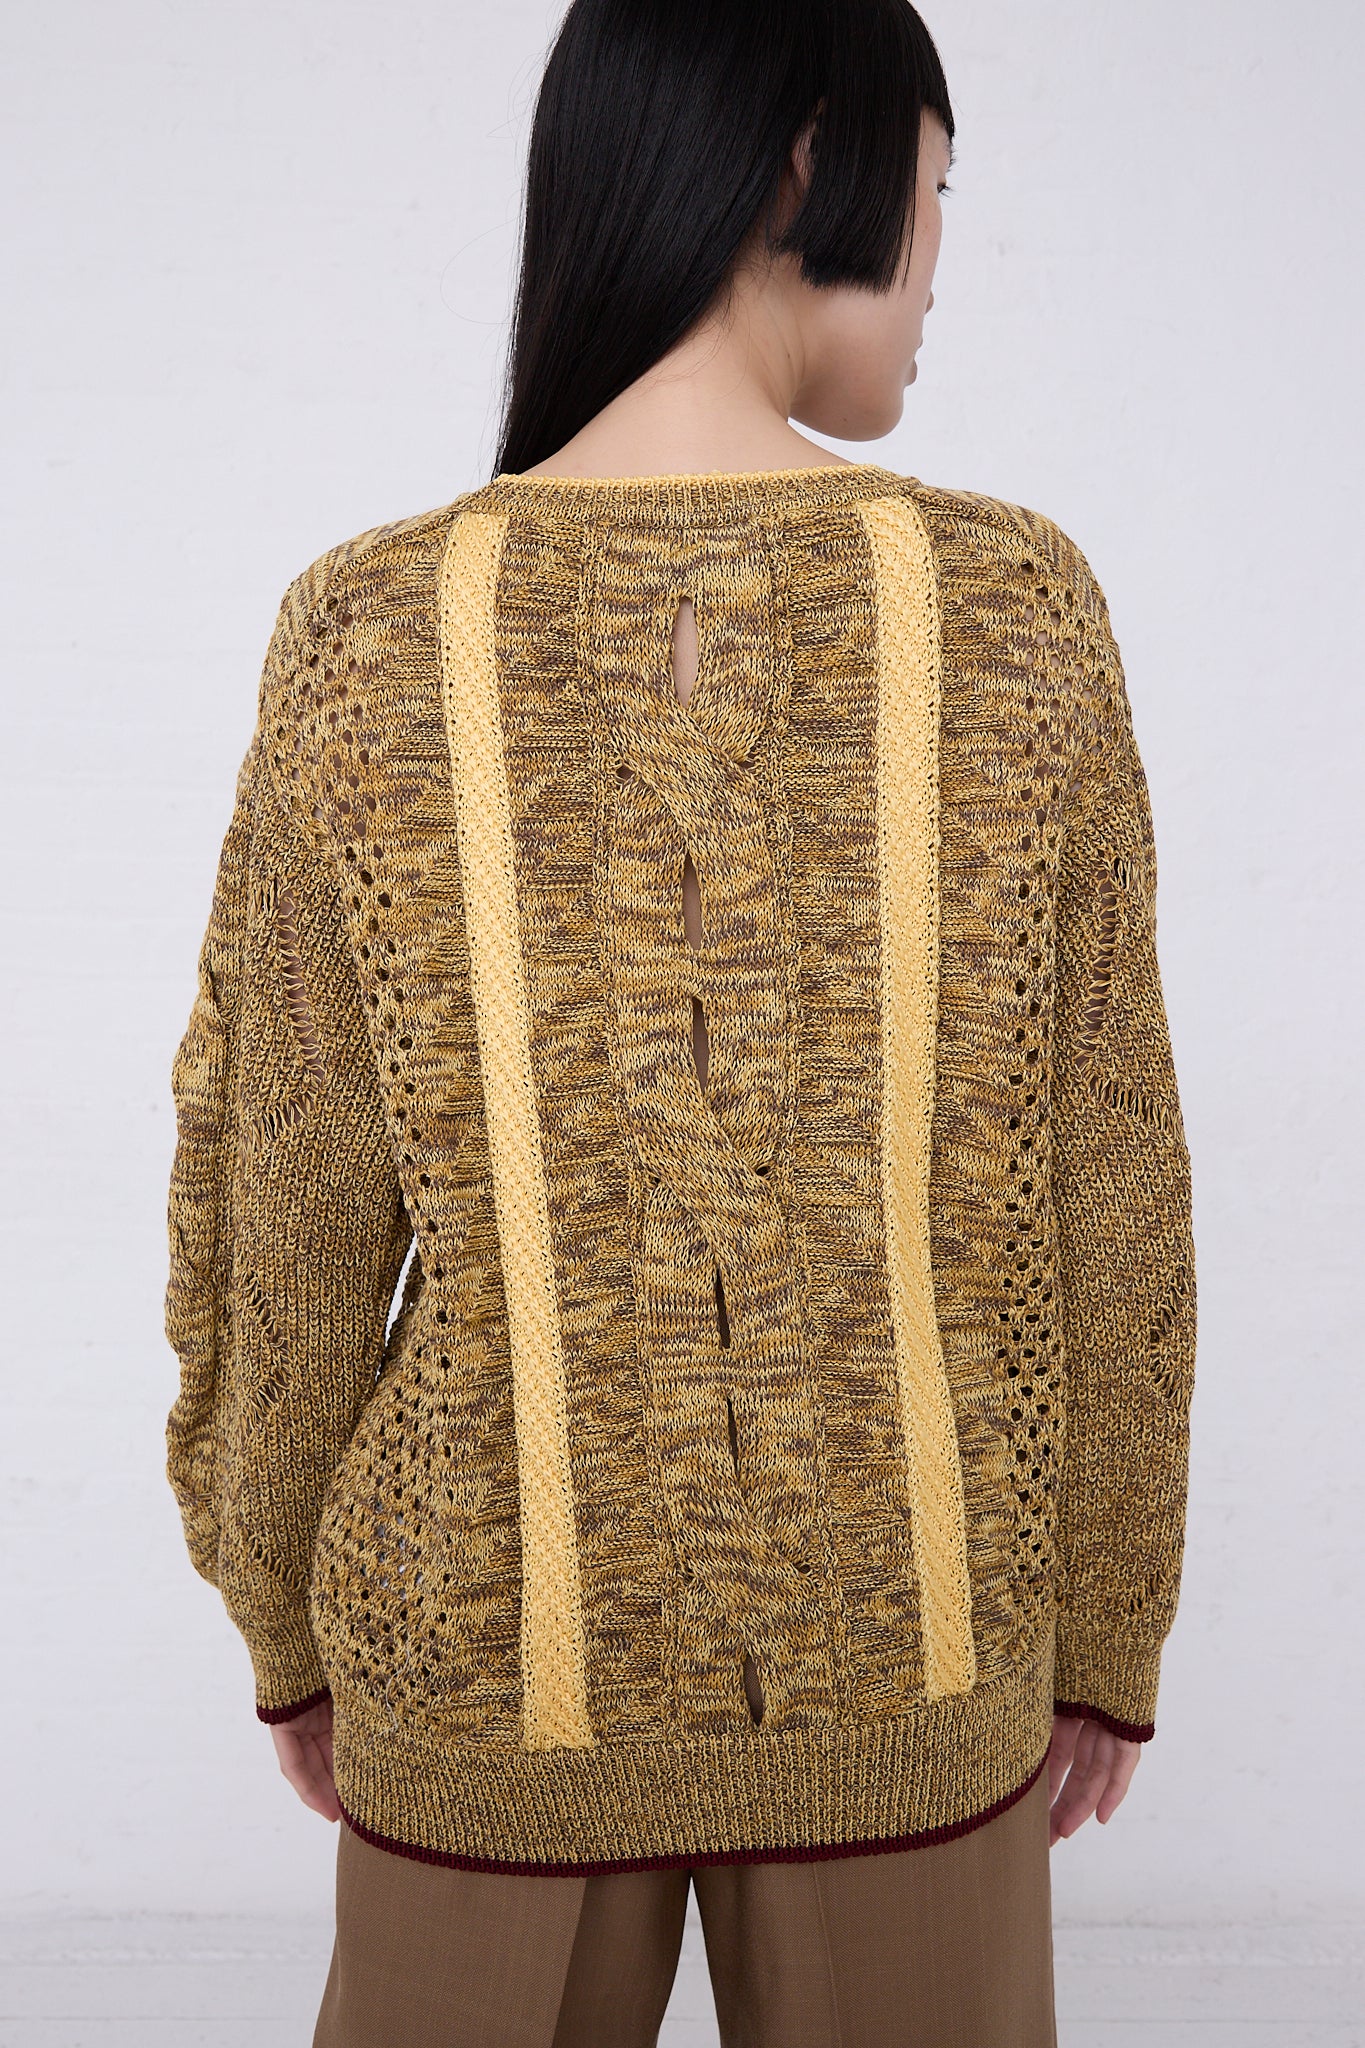 Woman from behind wearing a TOGA ARCHIVES Mesh Knit Pullover in Yellow with ribbon details along the spine, standing against a plain white background.